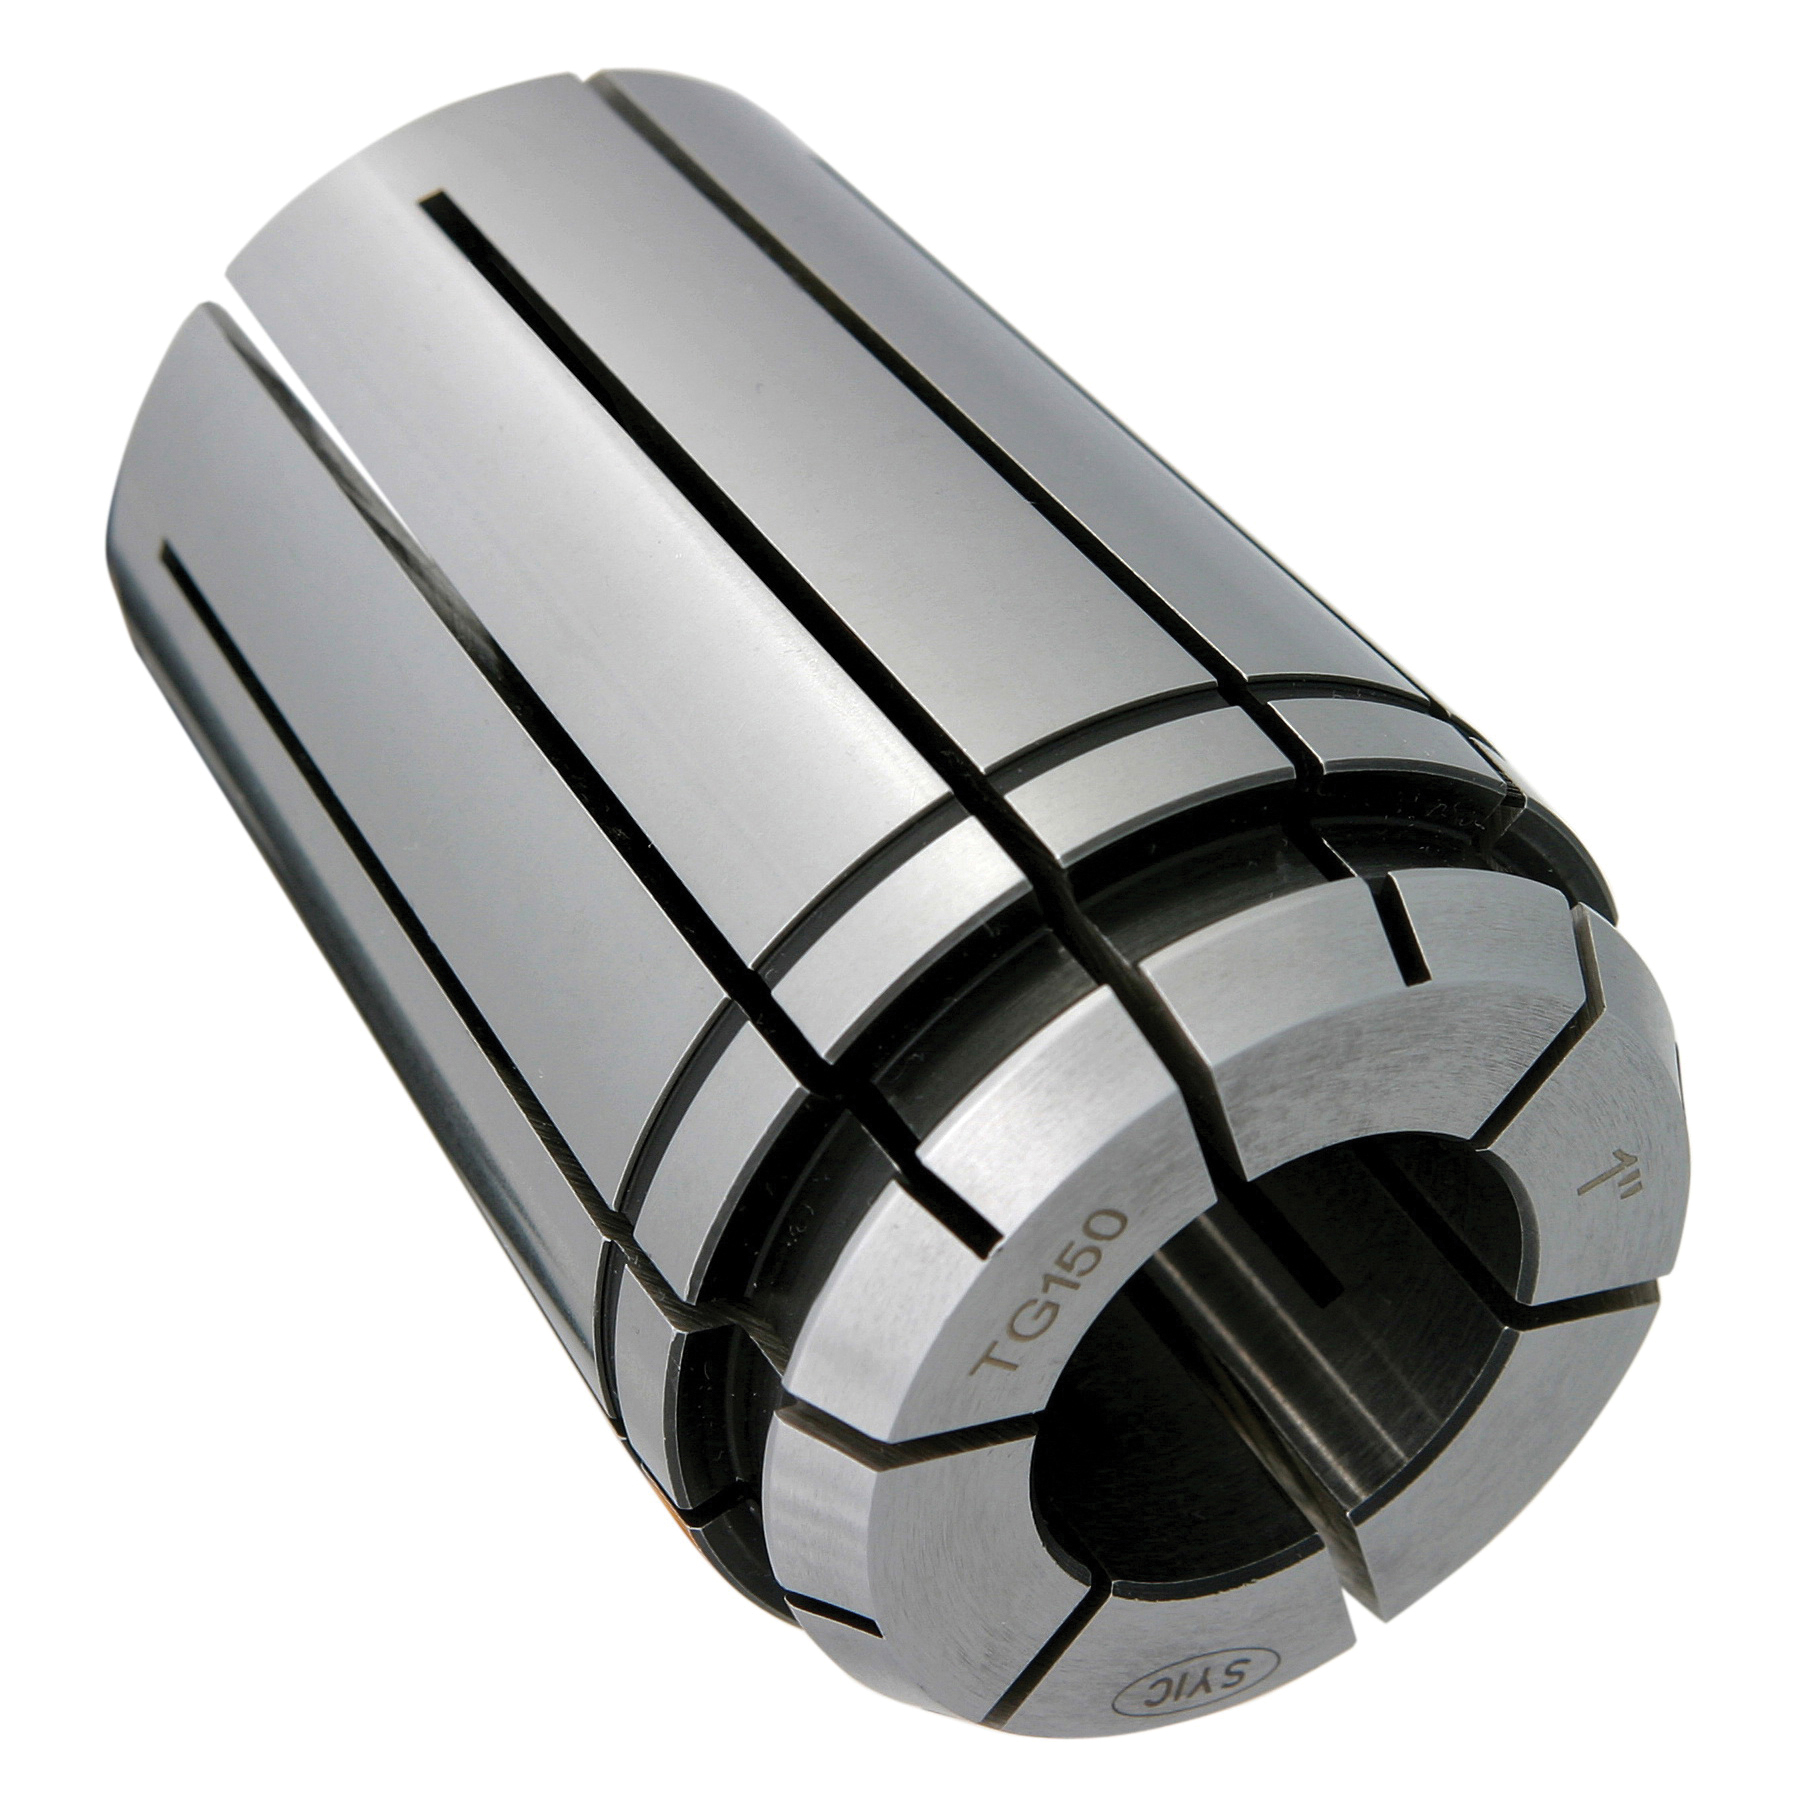 TG150 1-15/64" COLLET